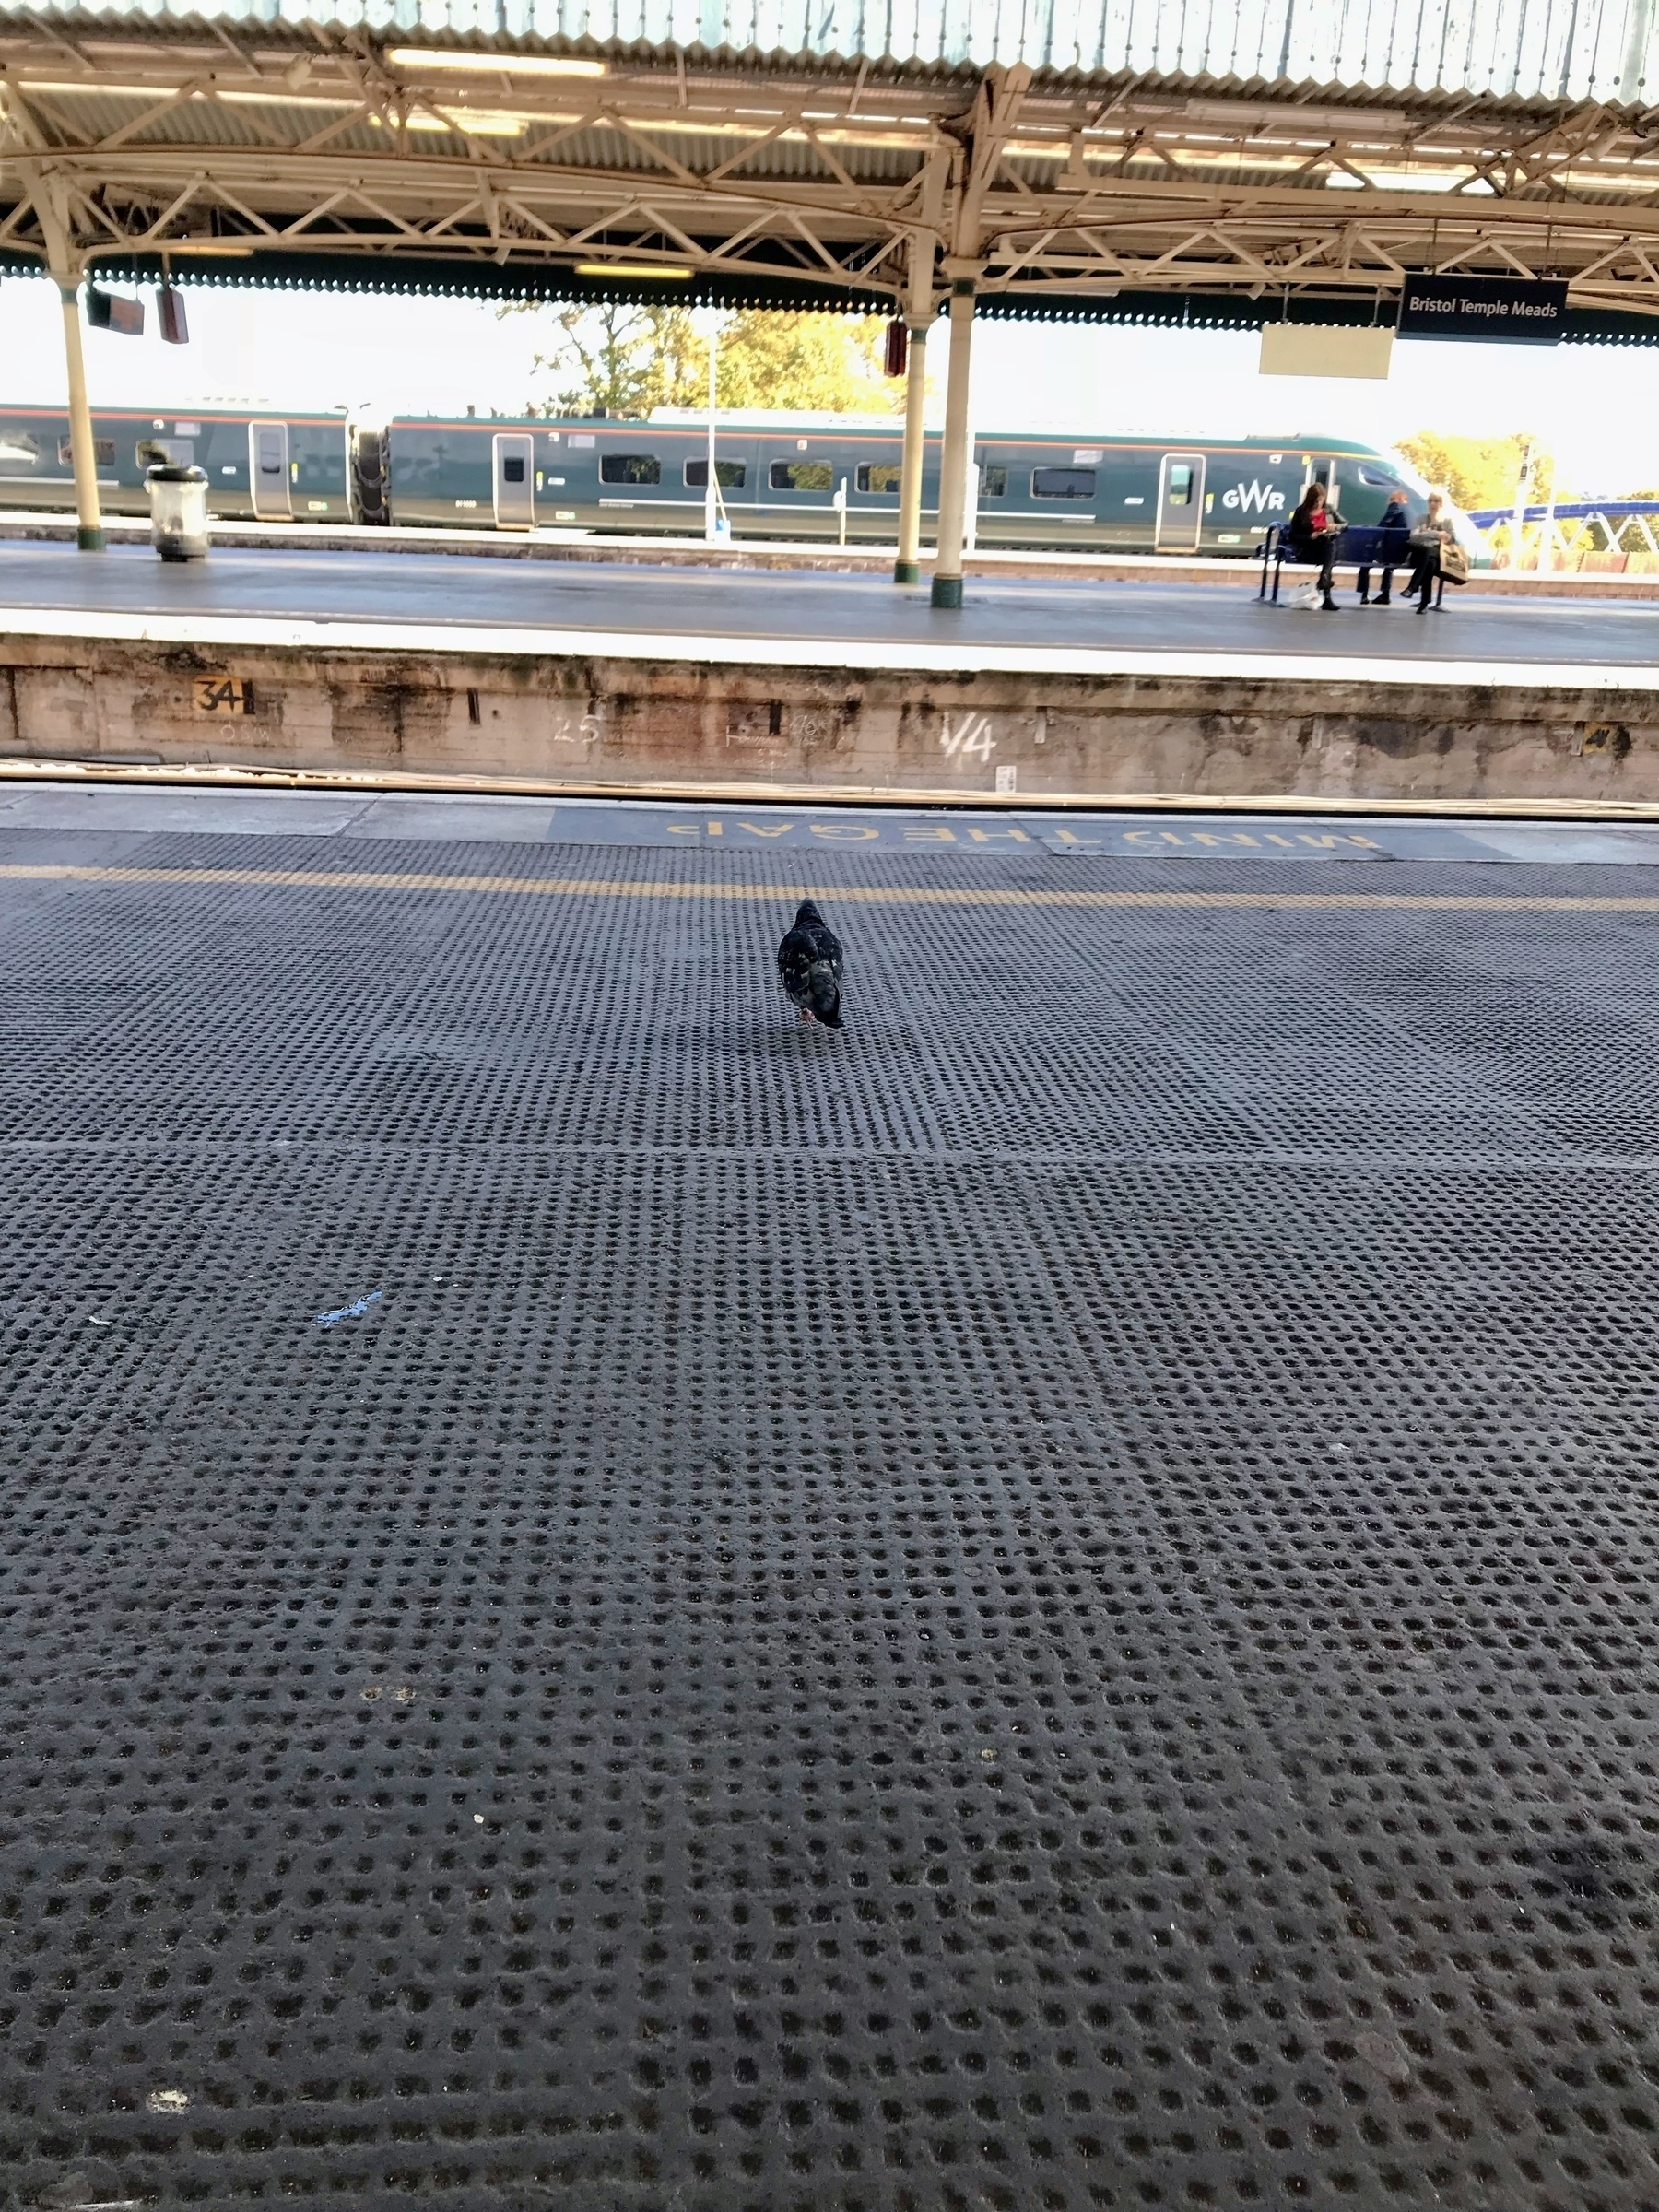 A pigeon standing on the platform at Temple Meads Station in Bristol, England